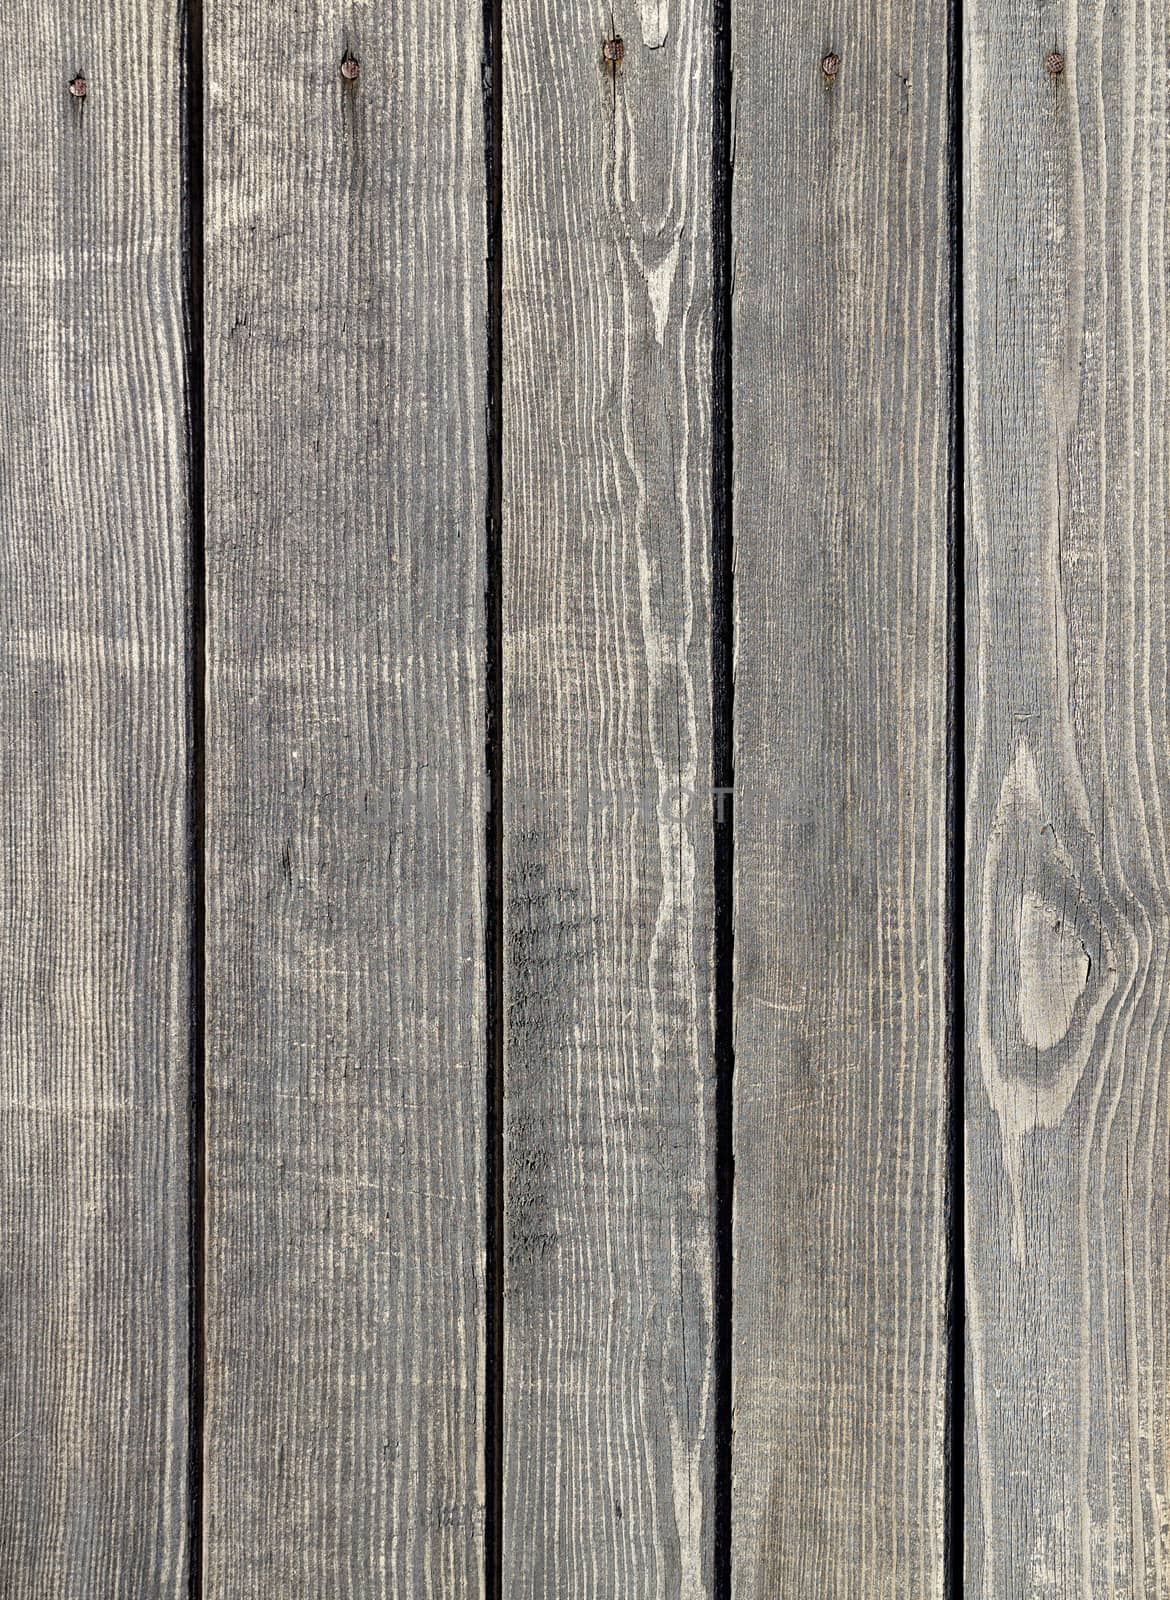 Planks of weathered old gray wooden fence by Sergii